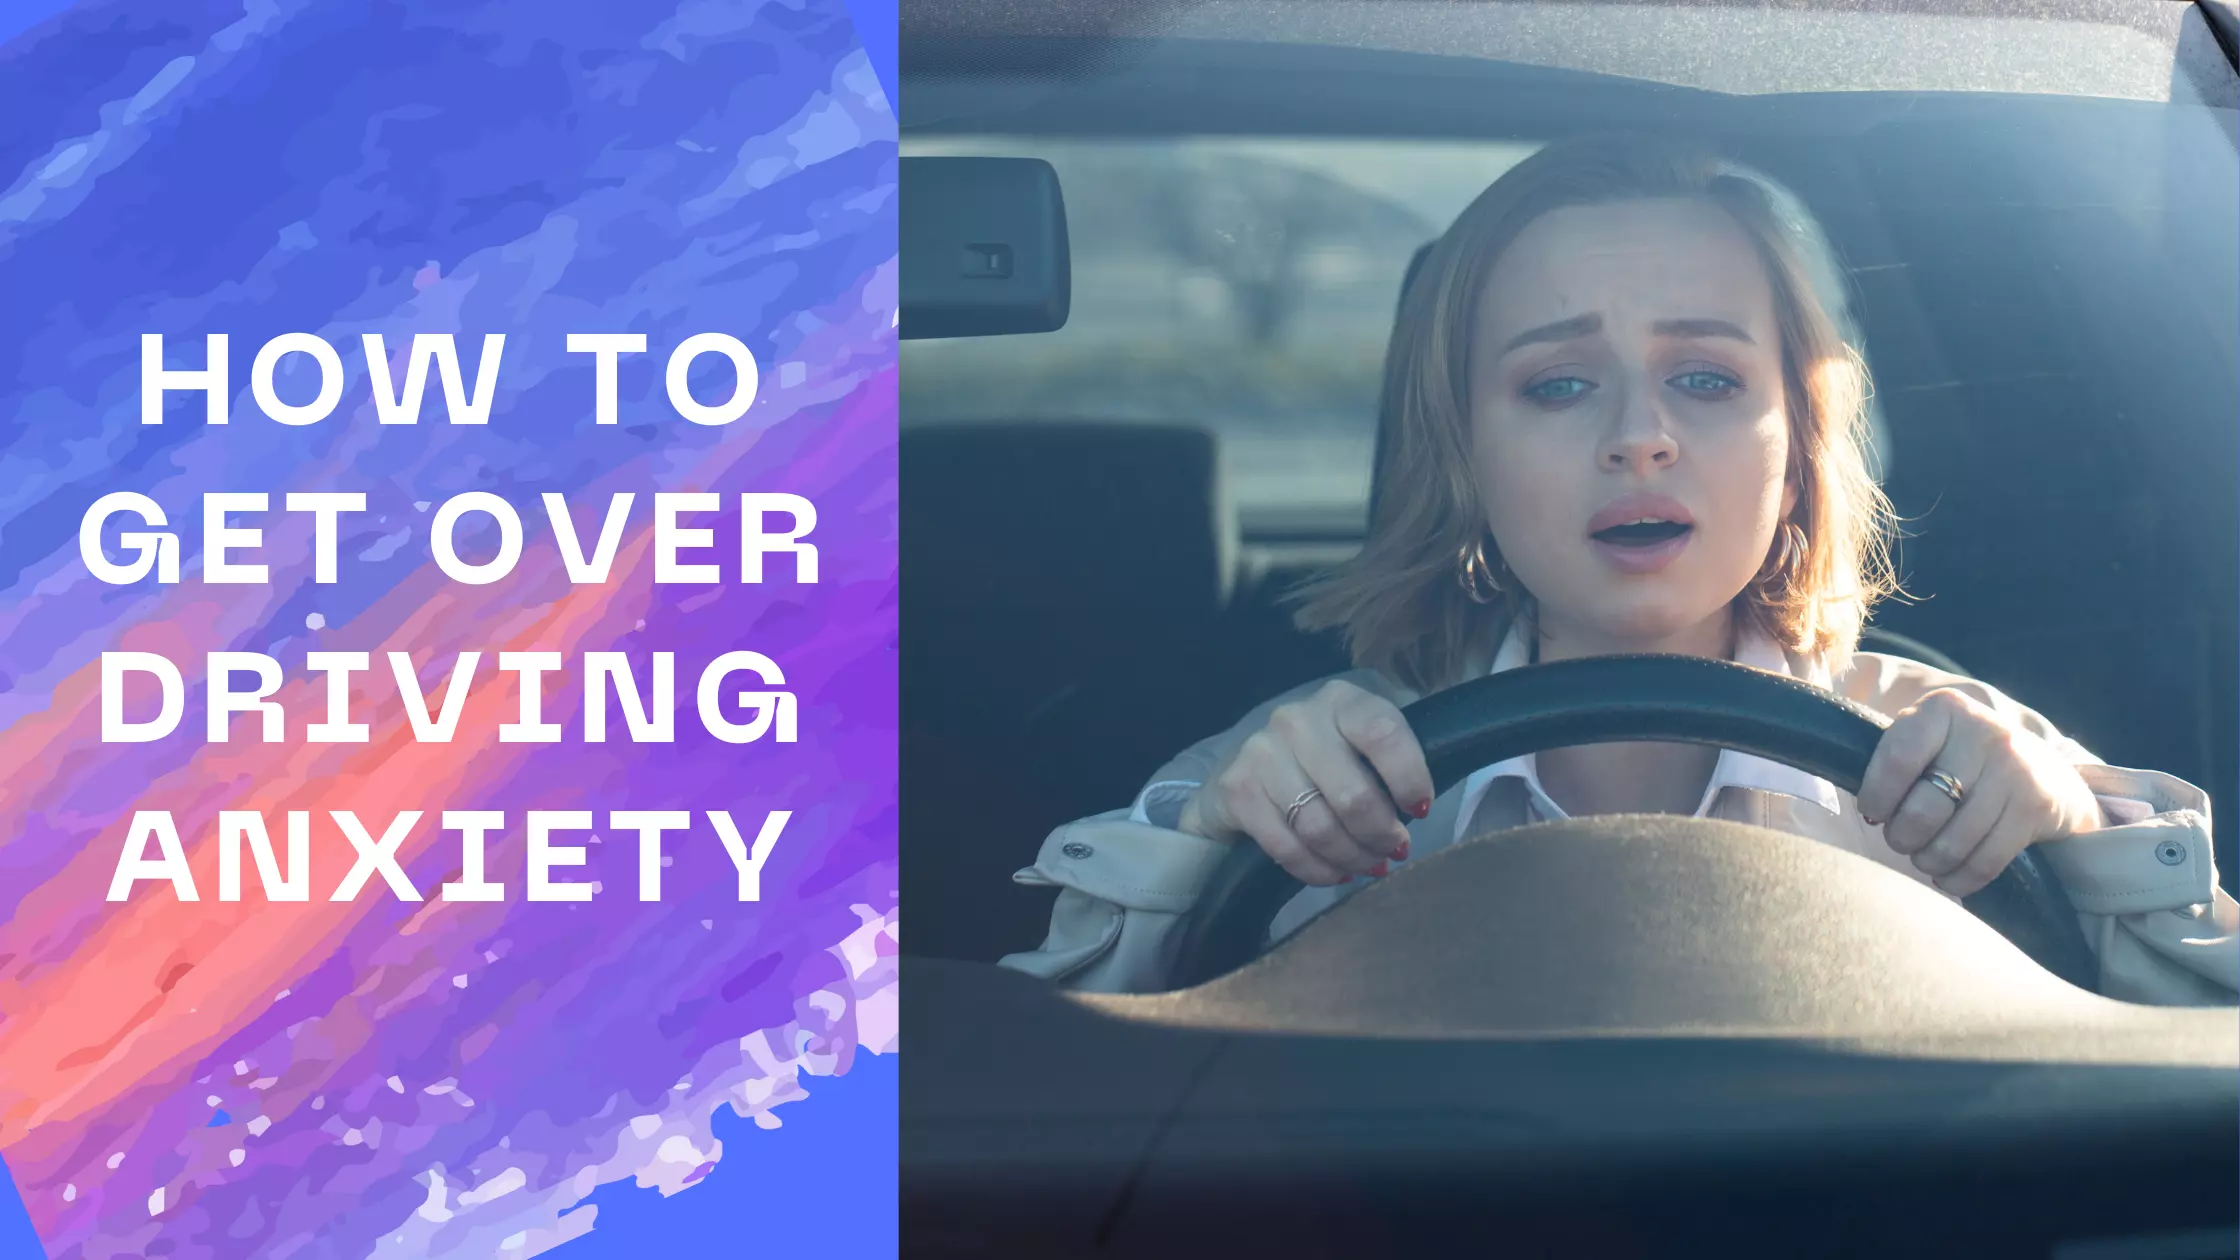 How to get over driving anxiety